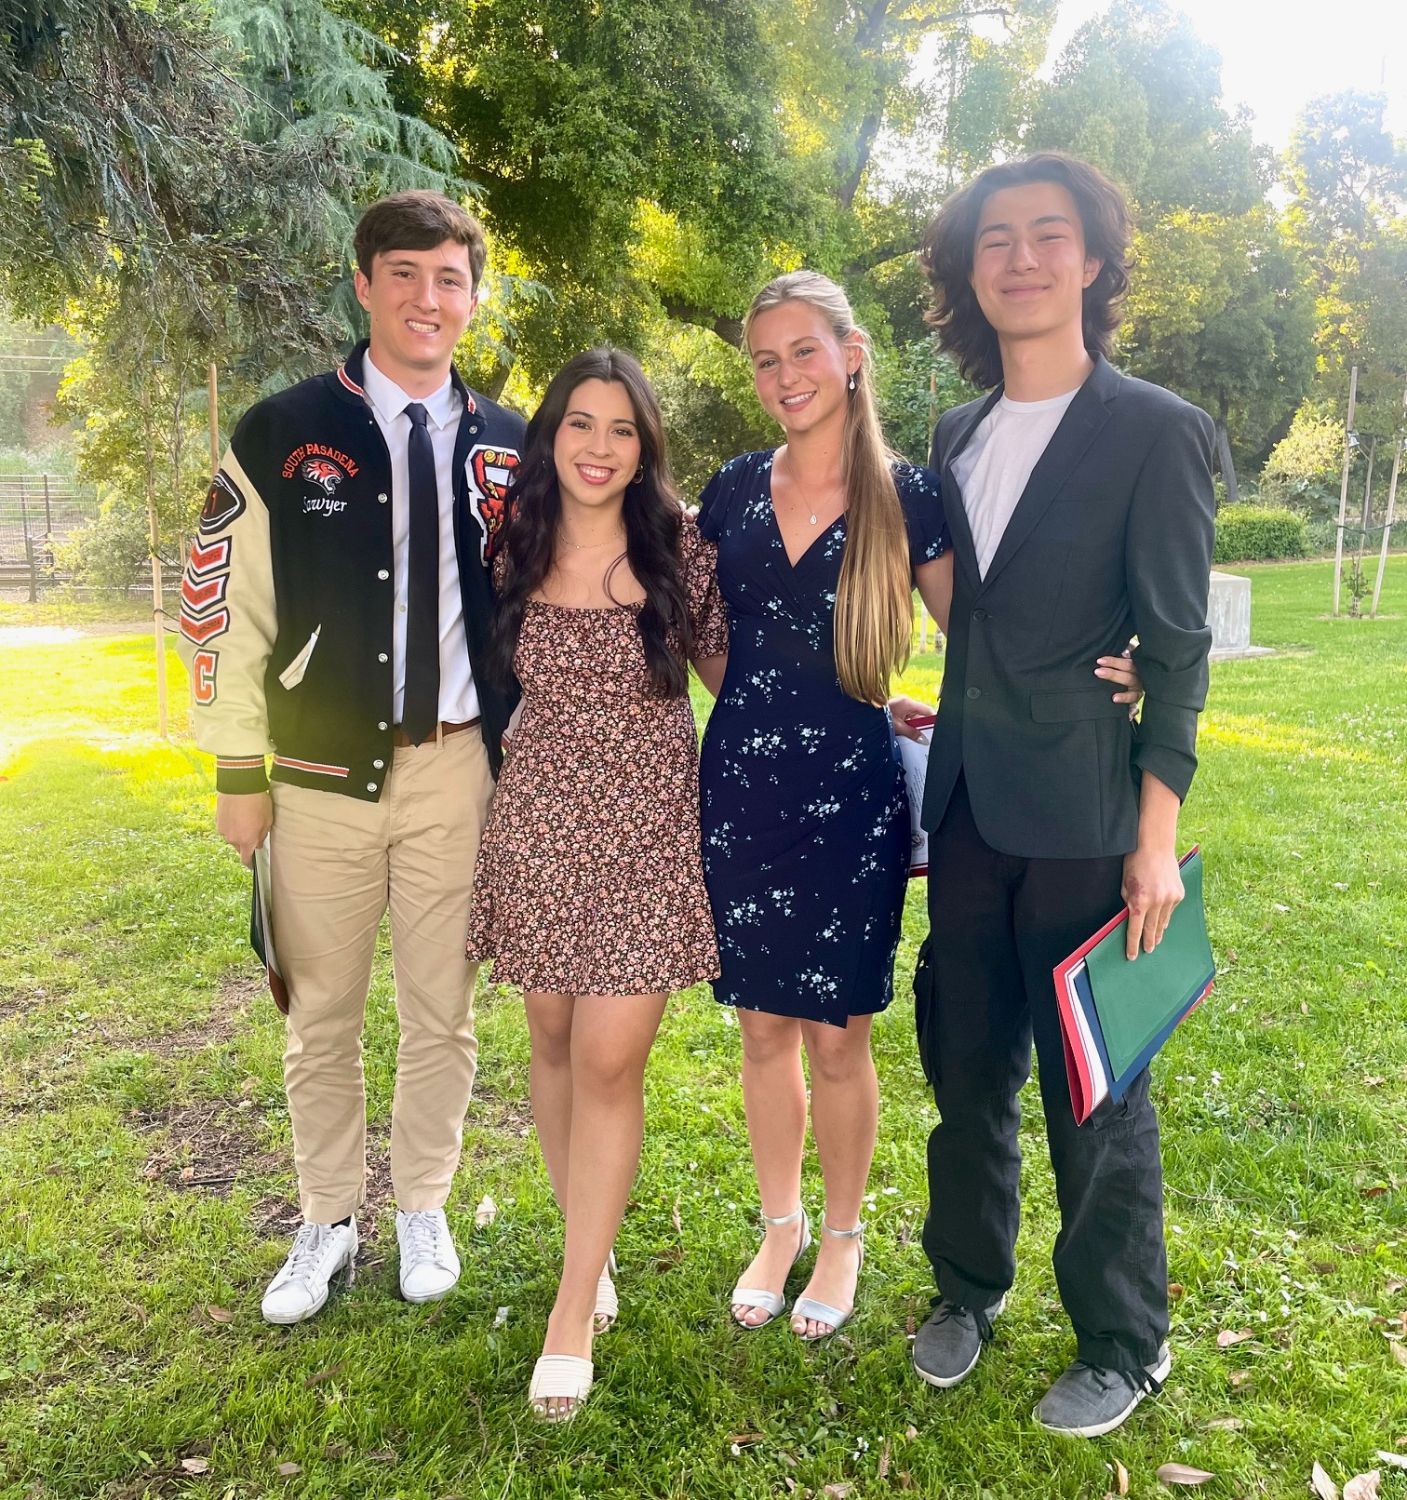 PHOTO: provided by Rachel Fox | The South Pasadenan | Oneonta scholarship recipients for 2024, Sawyer Fox, Mia Ramos, Danica Sterling, and Truman Lindenthaler.